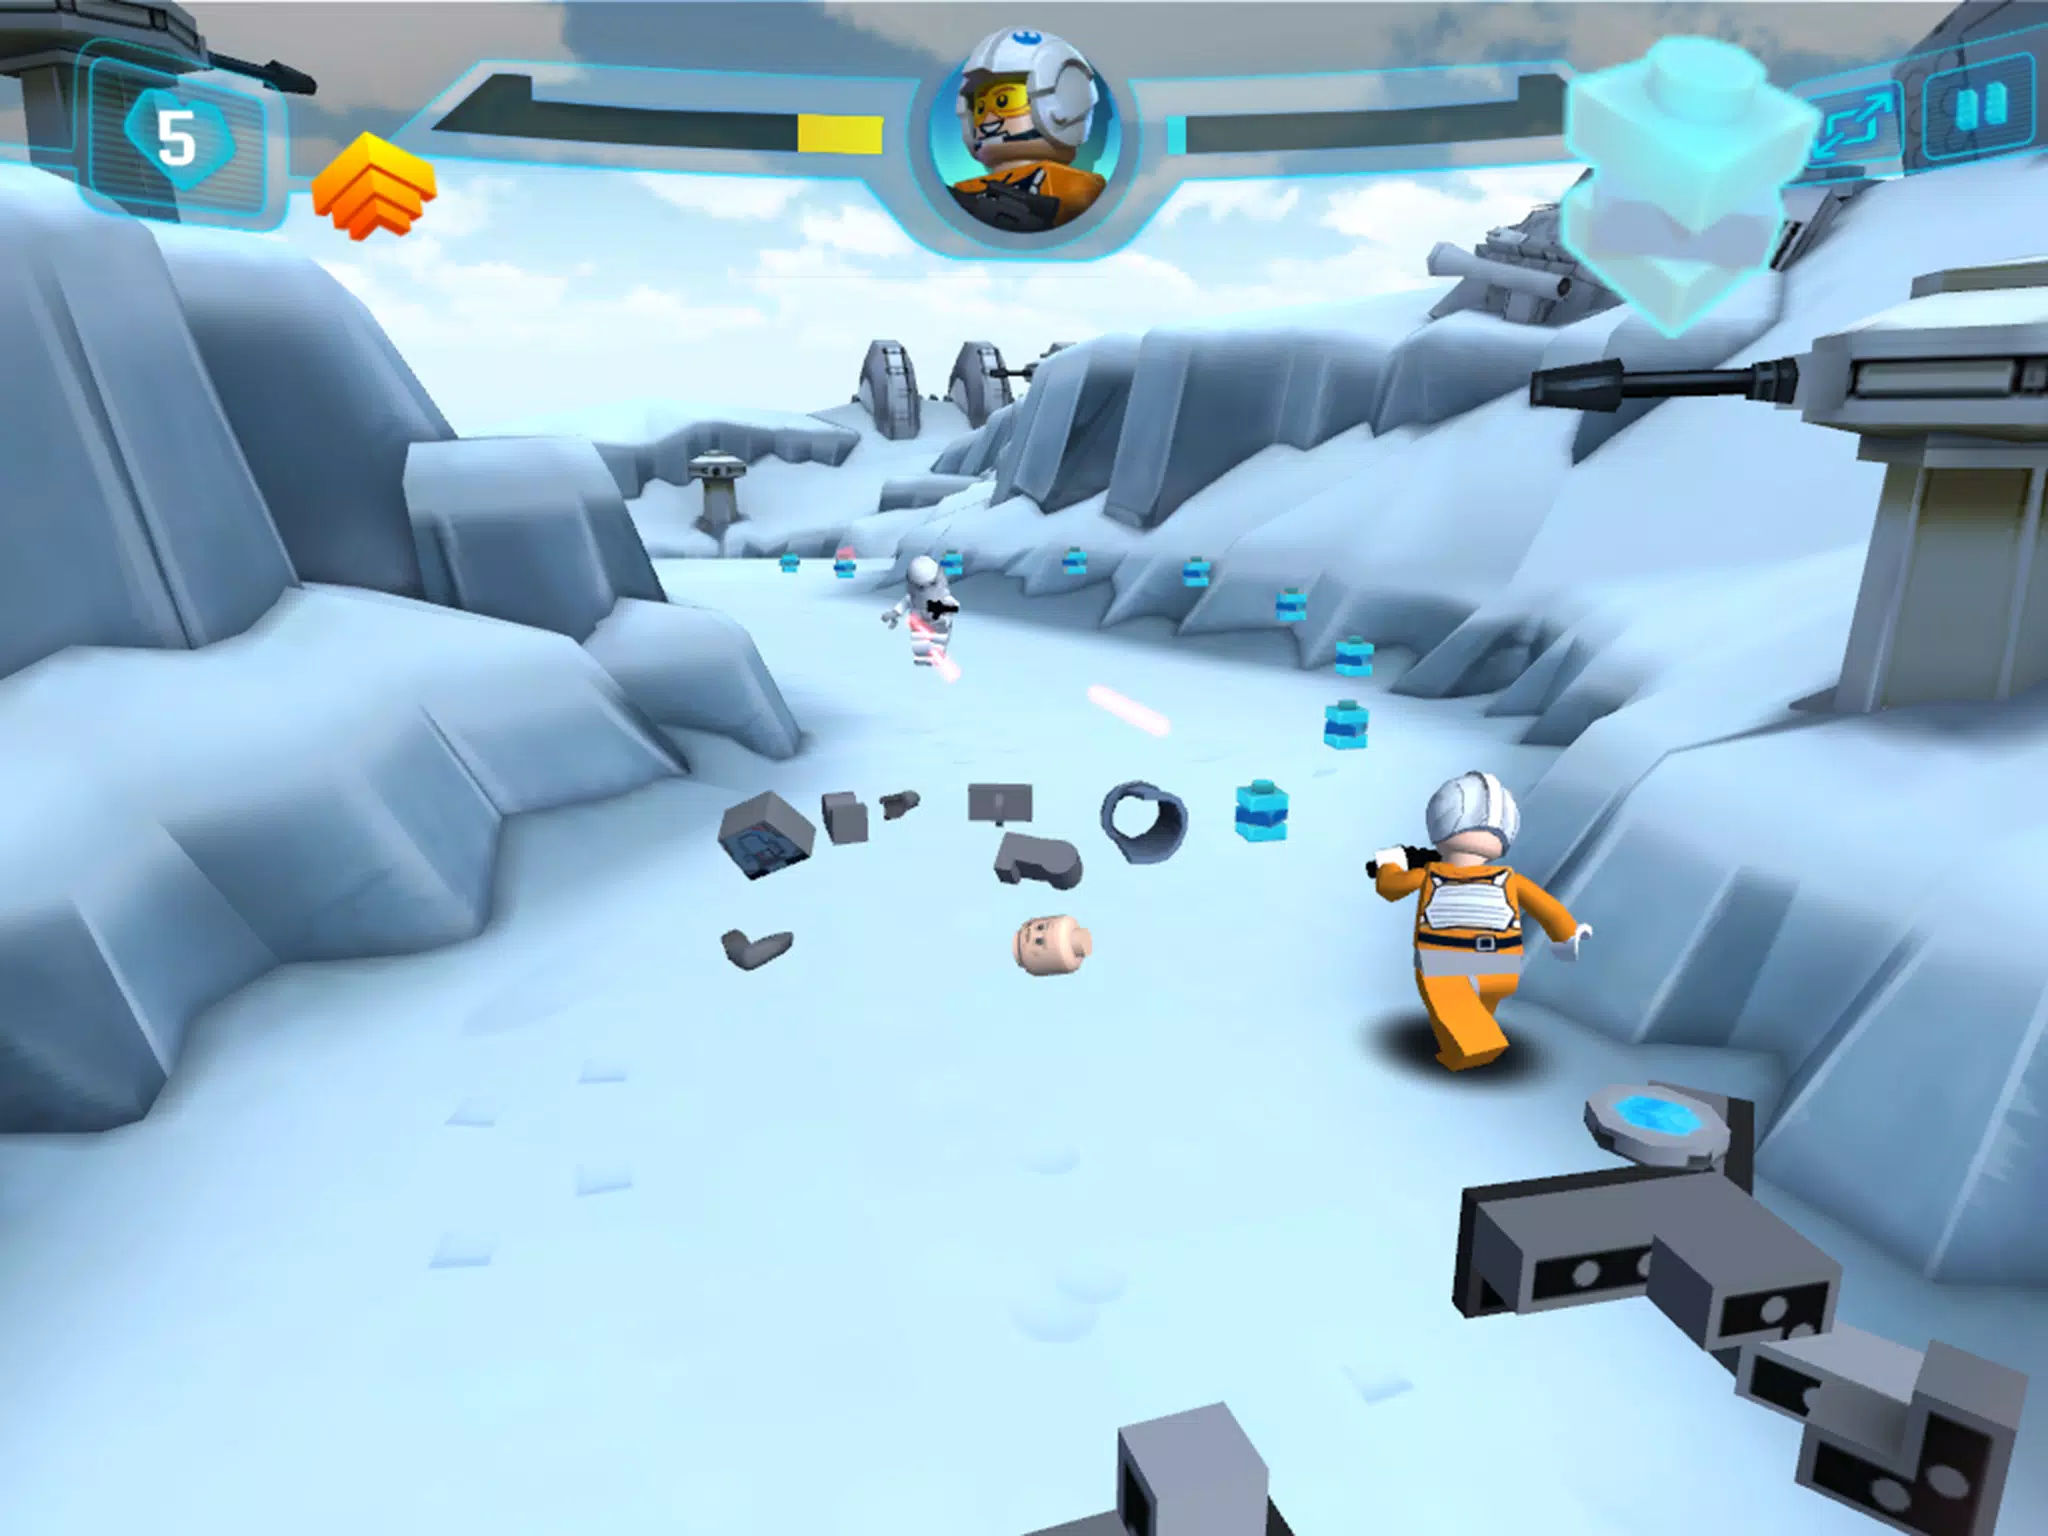 LEGO® Star Wars™ Yoda II for Android - APK Download